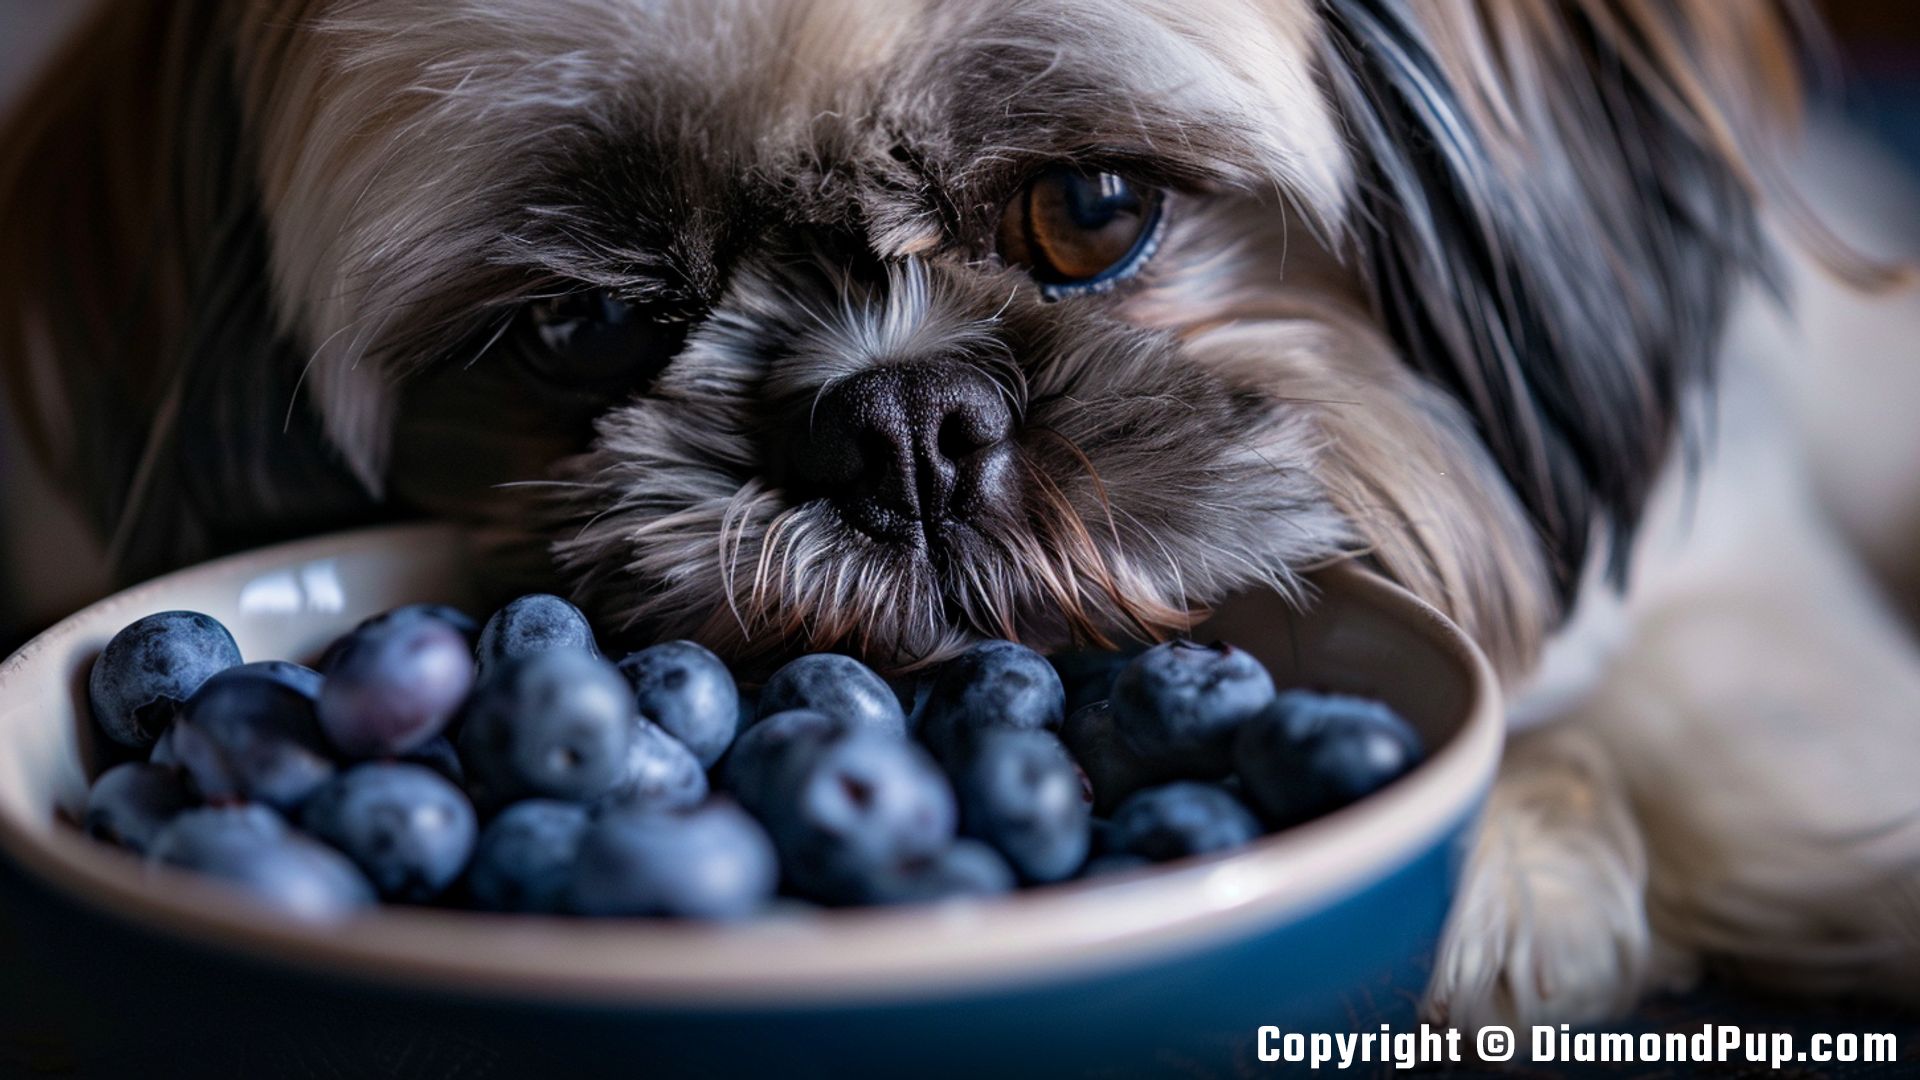 Photograph of Shih Tzu Eating Blueberries